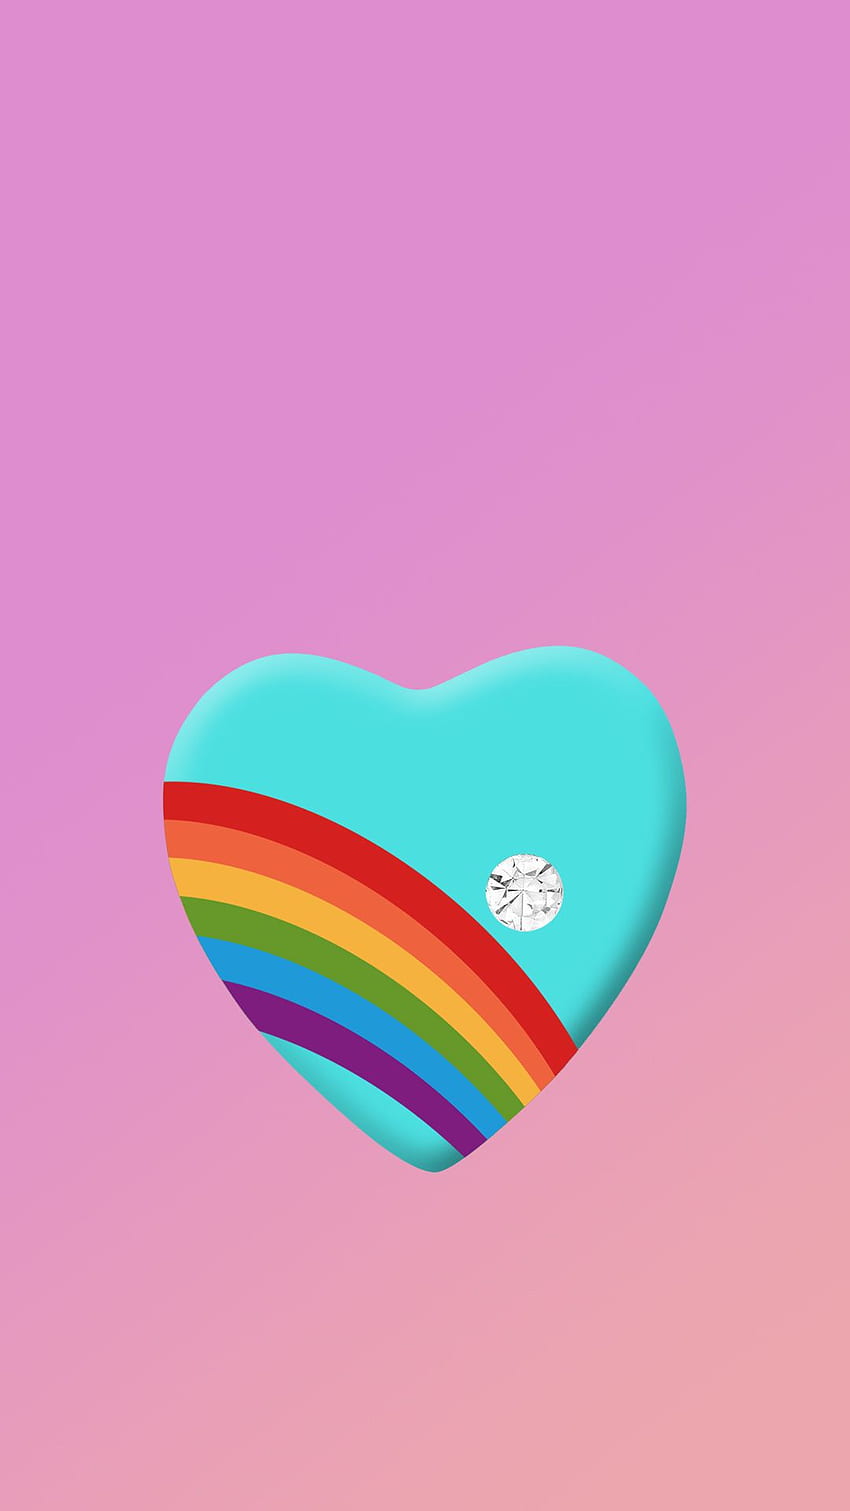 Share more than 84 rainbow heart wallpaper - in.cdgdbentre